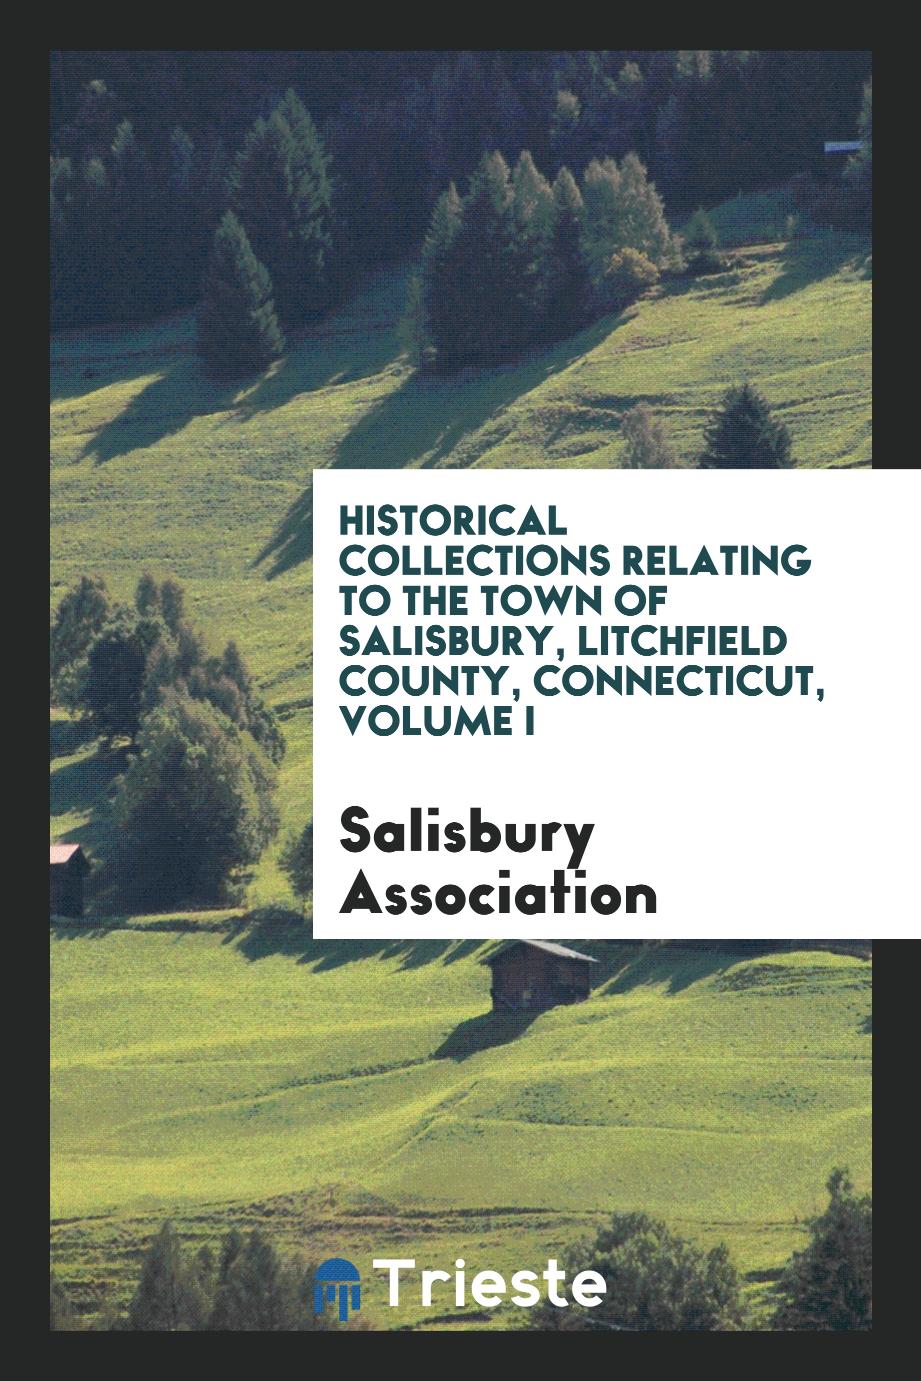 Historical collections relating to the town of Salisbury, Litchfield county, Connecticut, Volume I